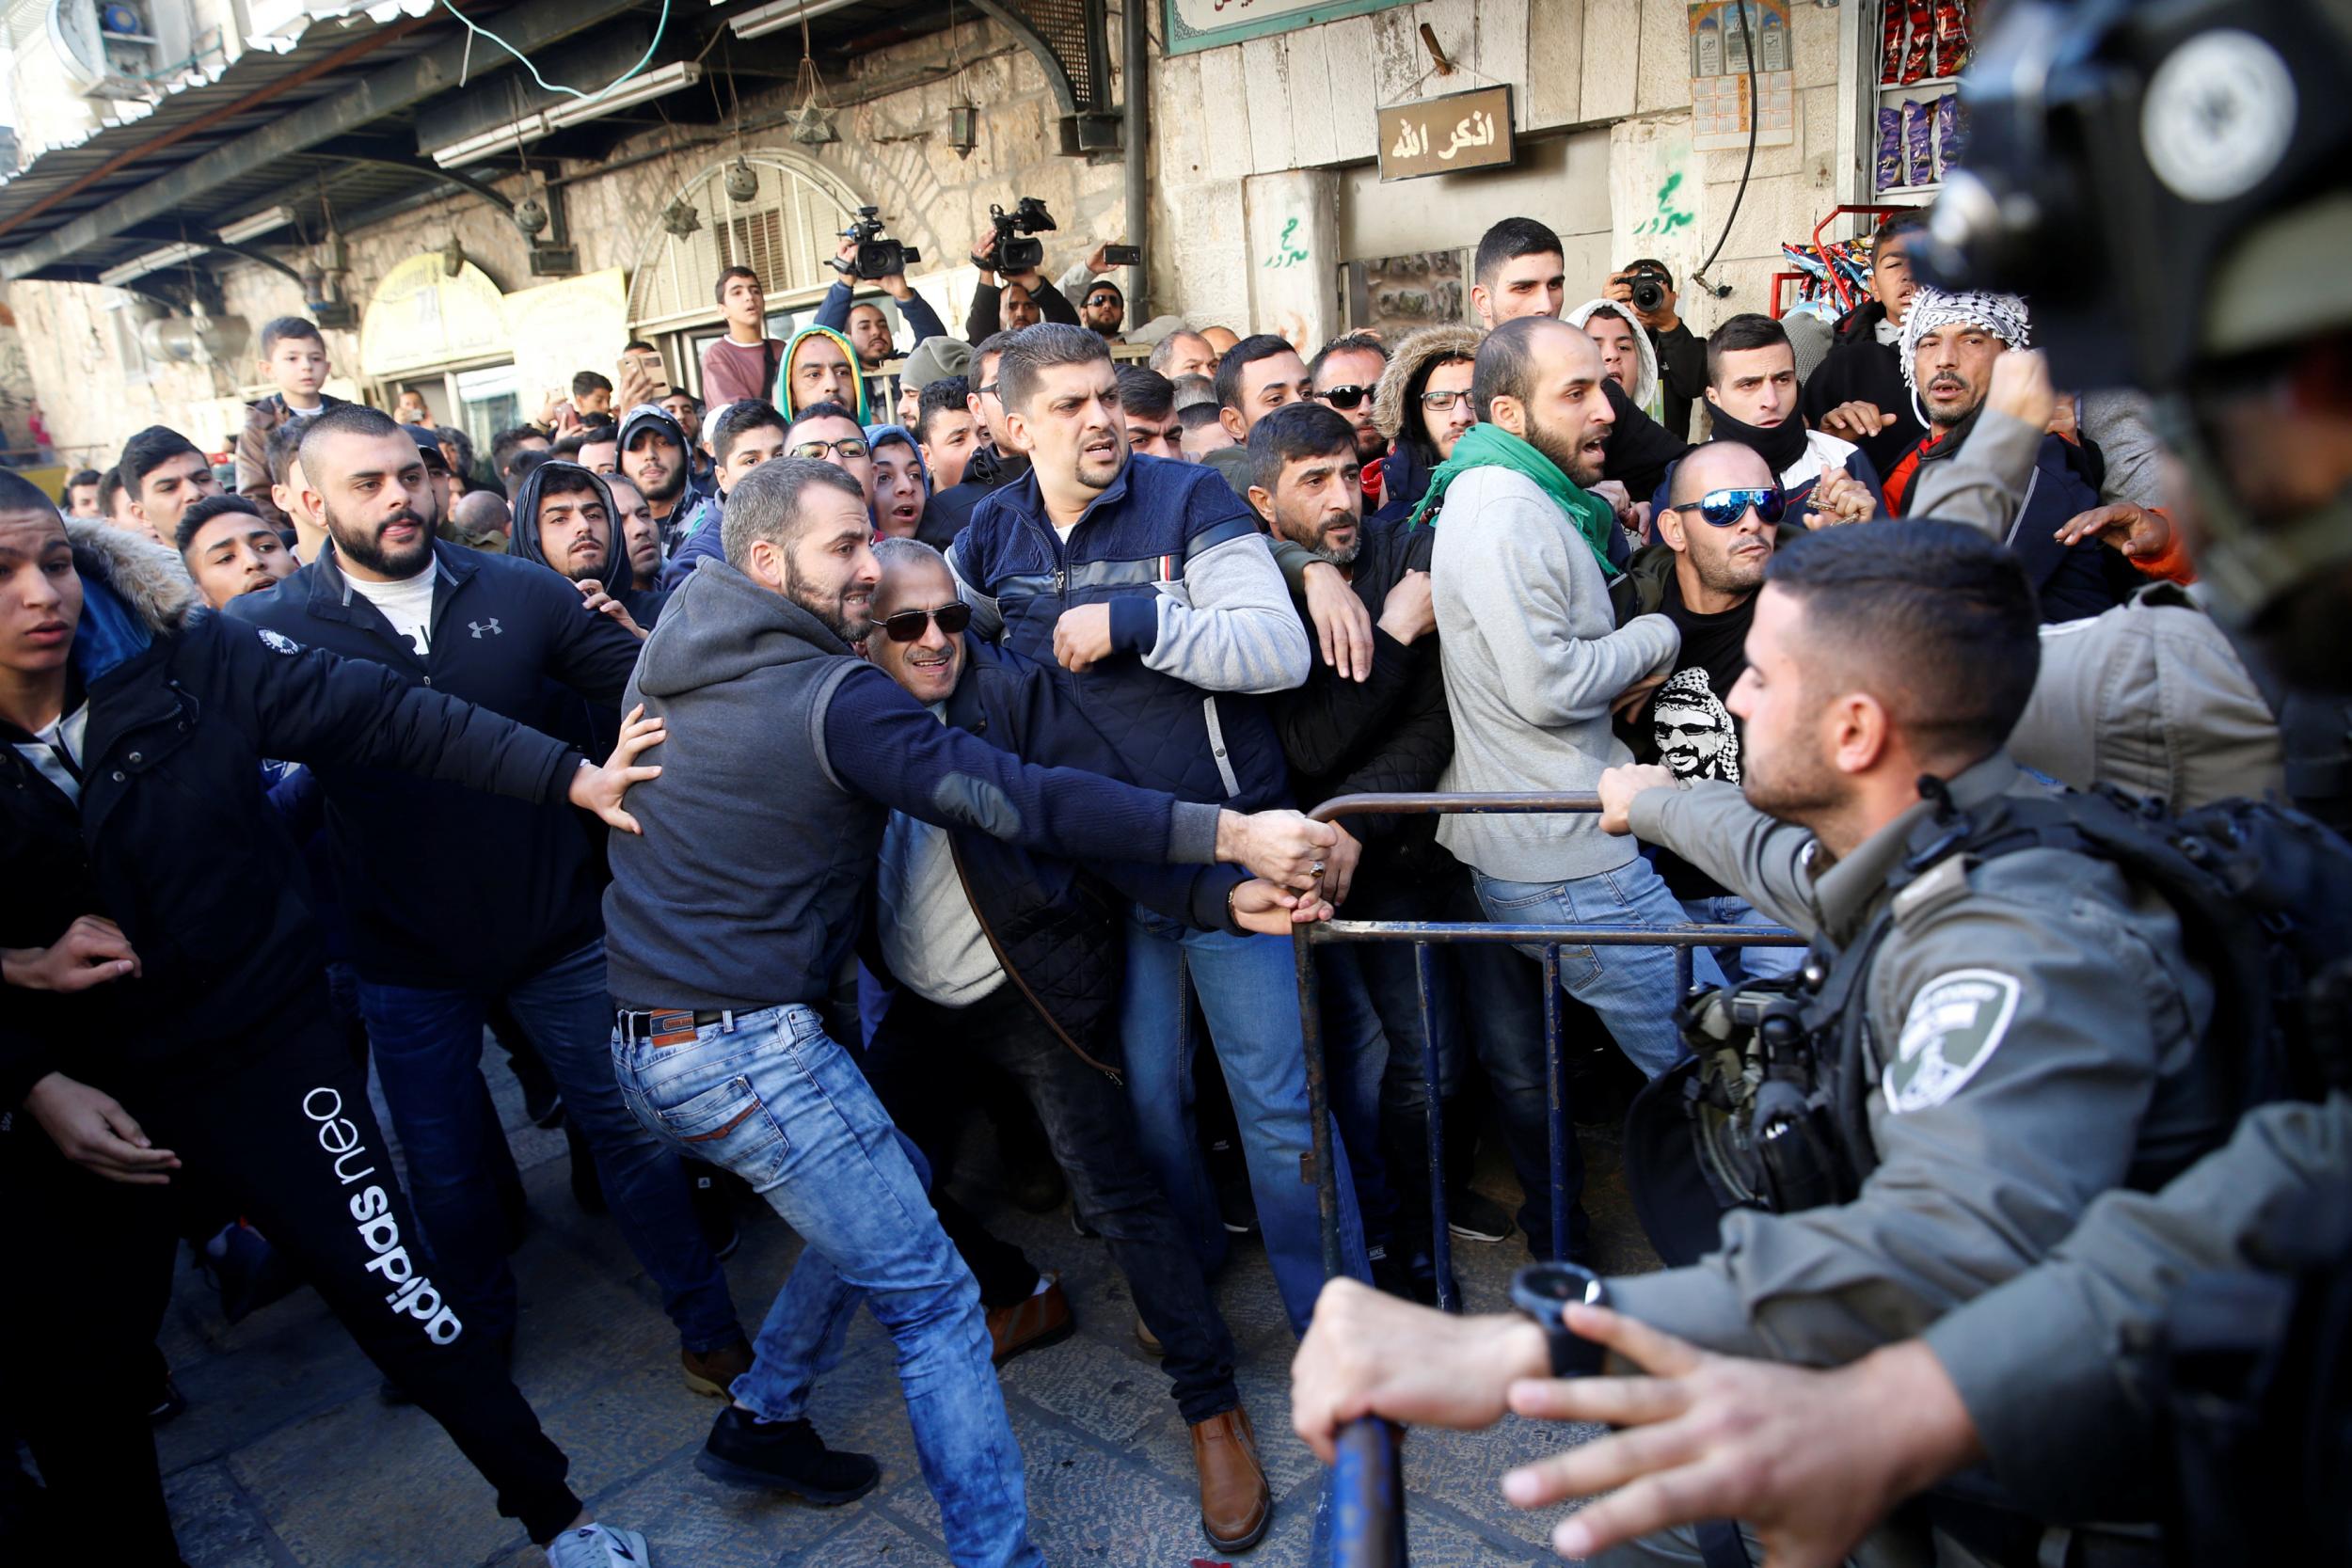 Israeli border police and Palestinians scuffle after Friday prayers in Jerusalem's Old City